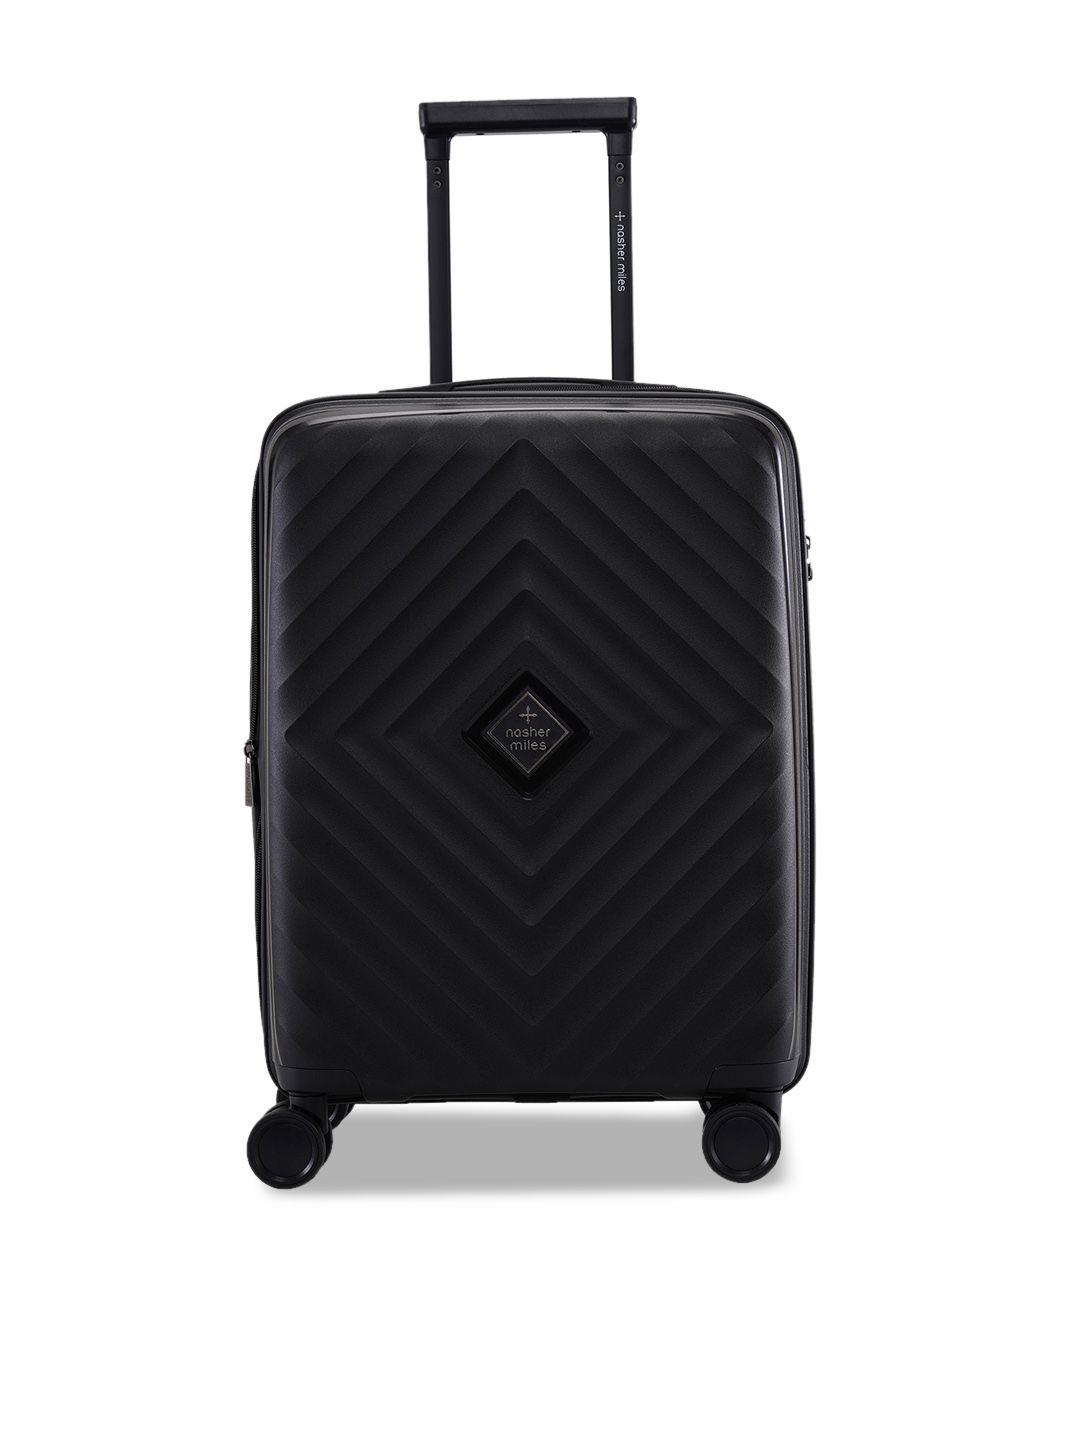 nasher miles hard-sided cabin trolley suitcase